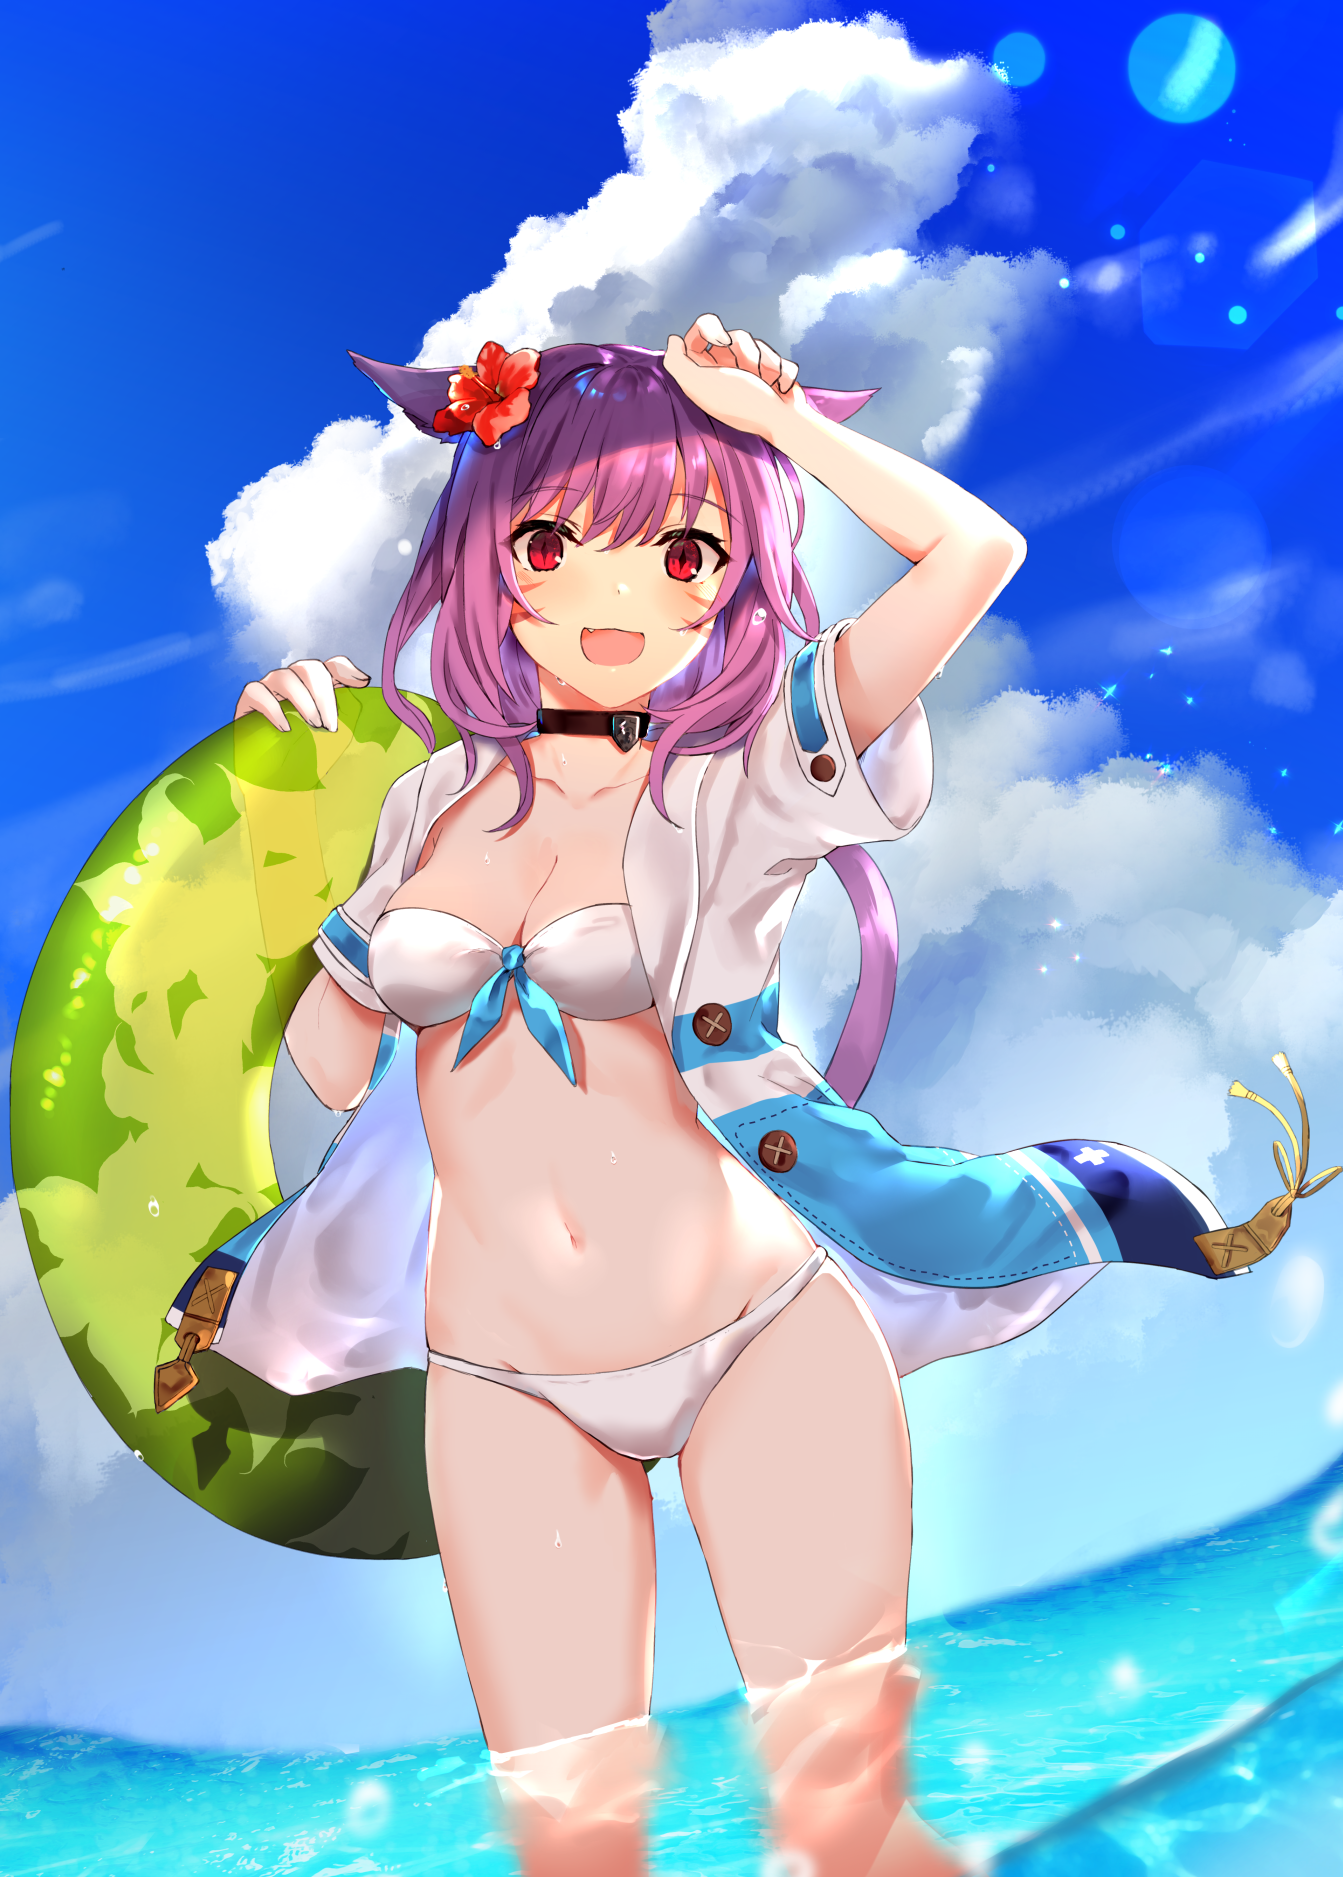 Anime 1343x1877 anime anime girls digital art artwork portrait display sky clouds water beach bikini white bikini flower in hair open mouth purple hair boobs small boobs belly button short hair cat ears animal ears cat girl arms up legs red eyes animal eyes 2D floater standing in water hibiscus choker open shirt one arm up looking at viewer